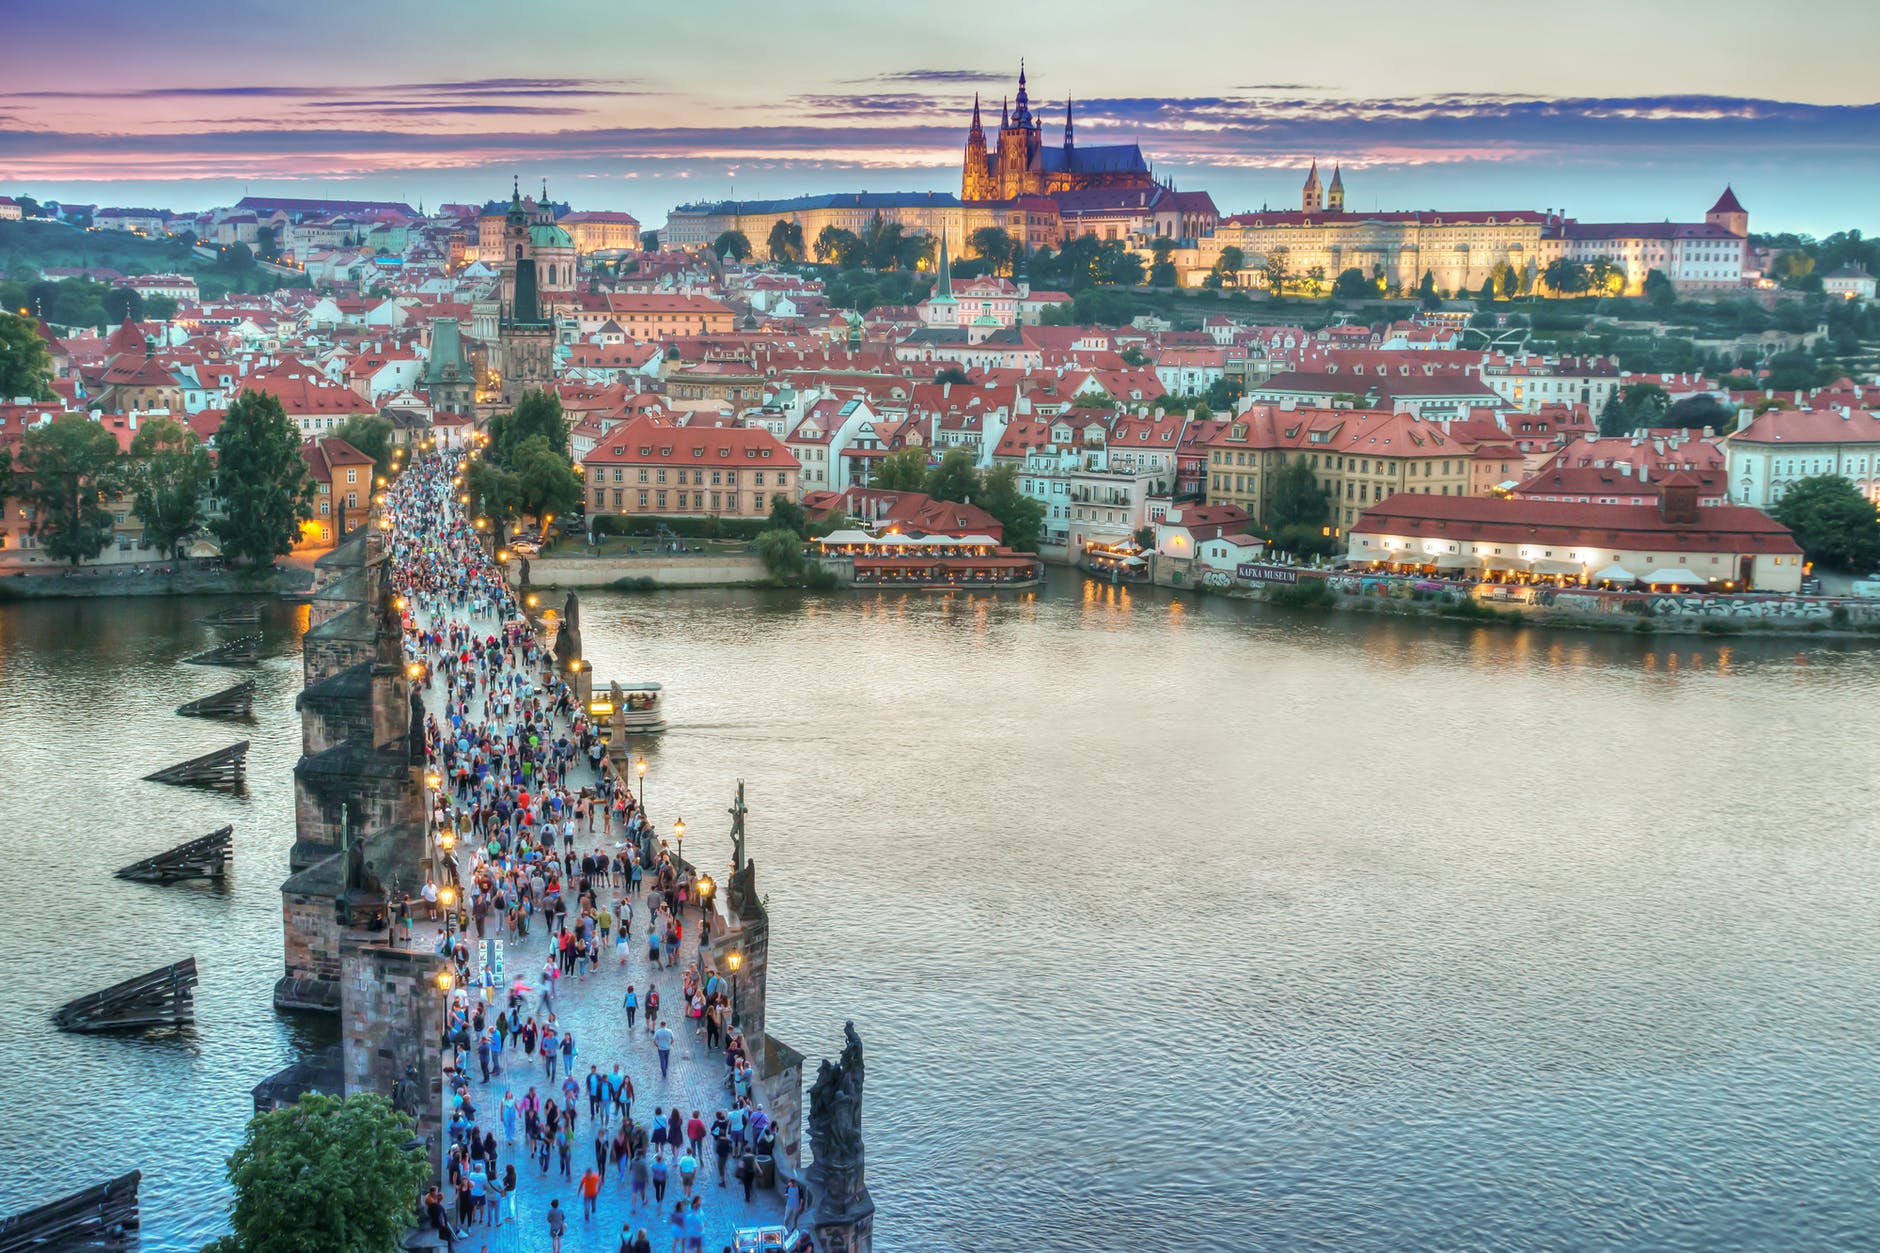 Hallucinogenic Alcohol and Feeding Muskrats in Prague [Podcast Episode 20]